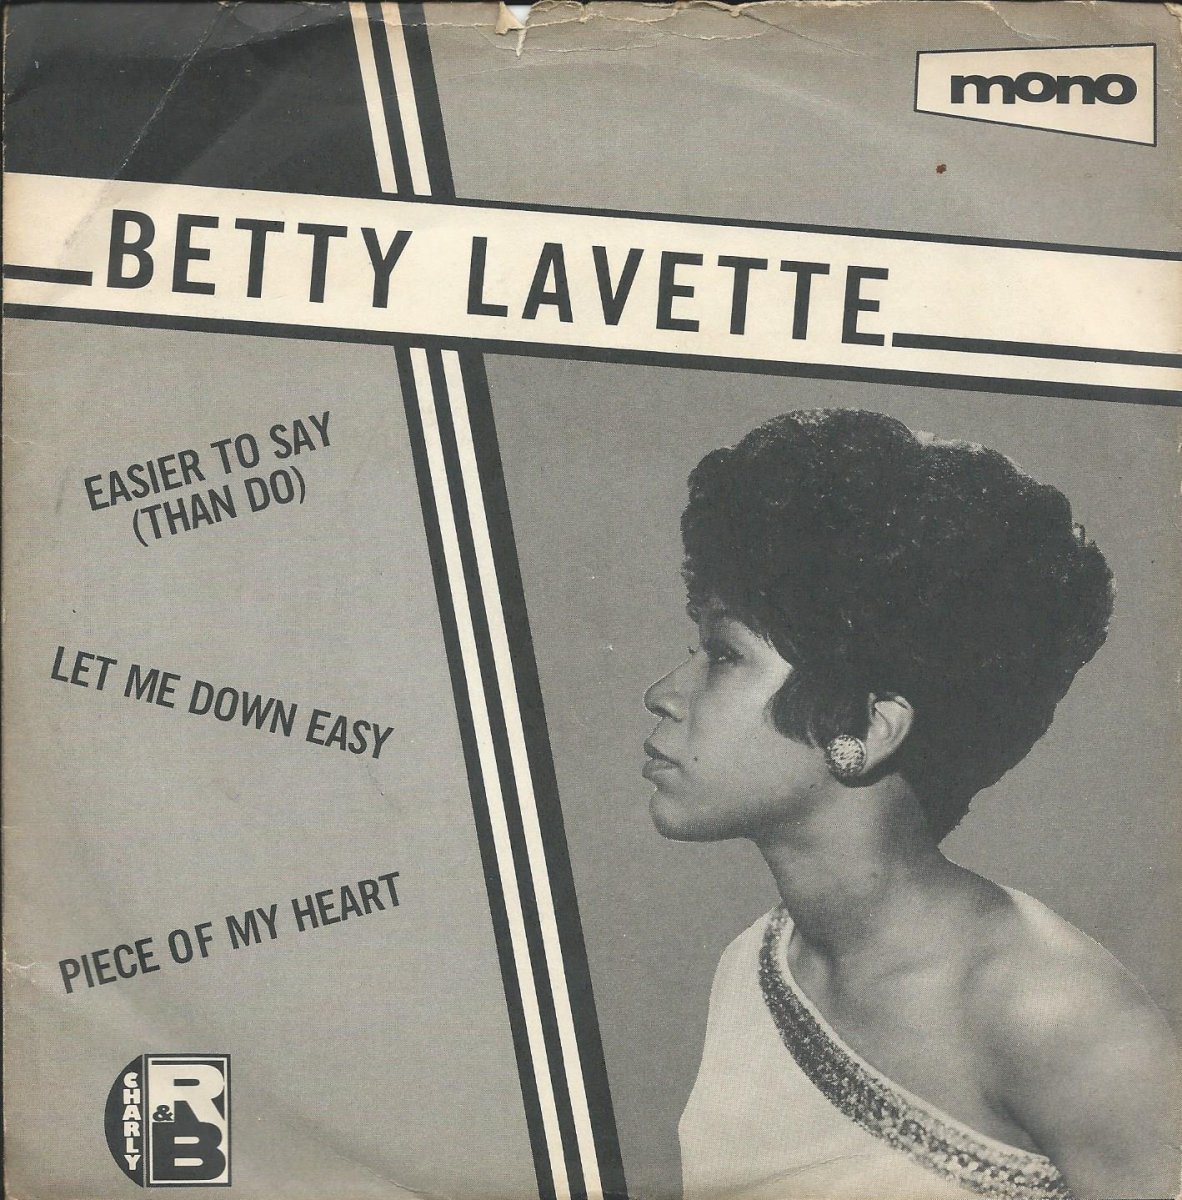 BETTY LAVETTE / EASIER TO SAY (THAN DO) / LET ME DOWN EASY / PIECE OF MY HEART (7